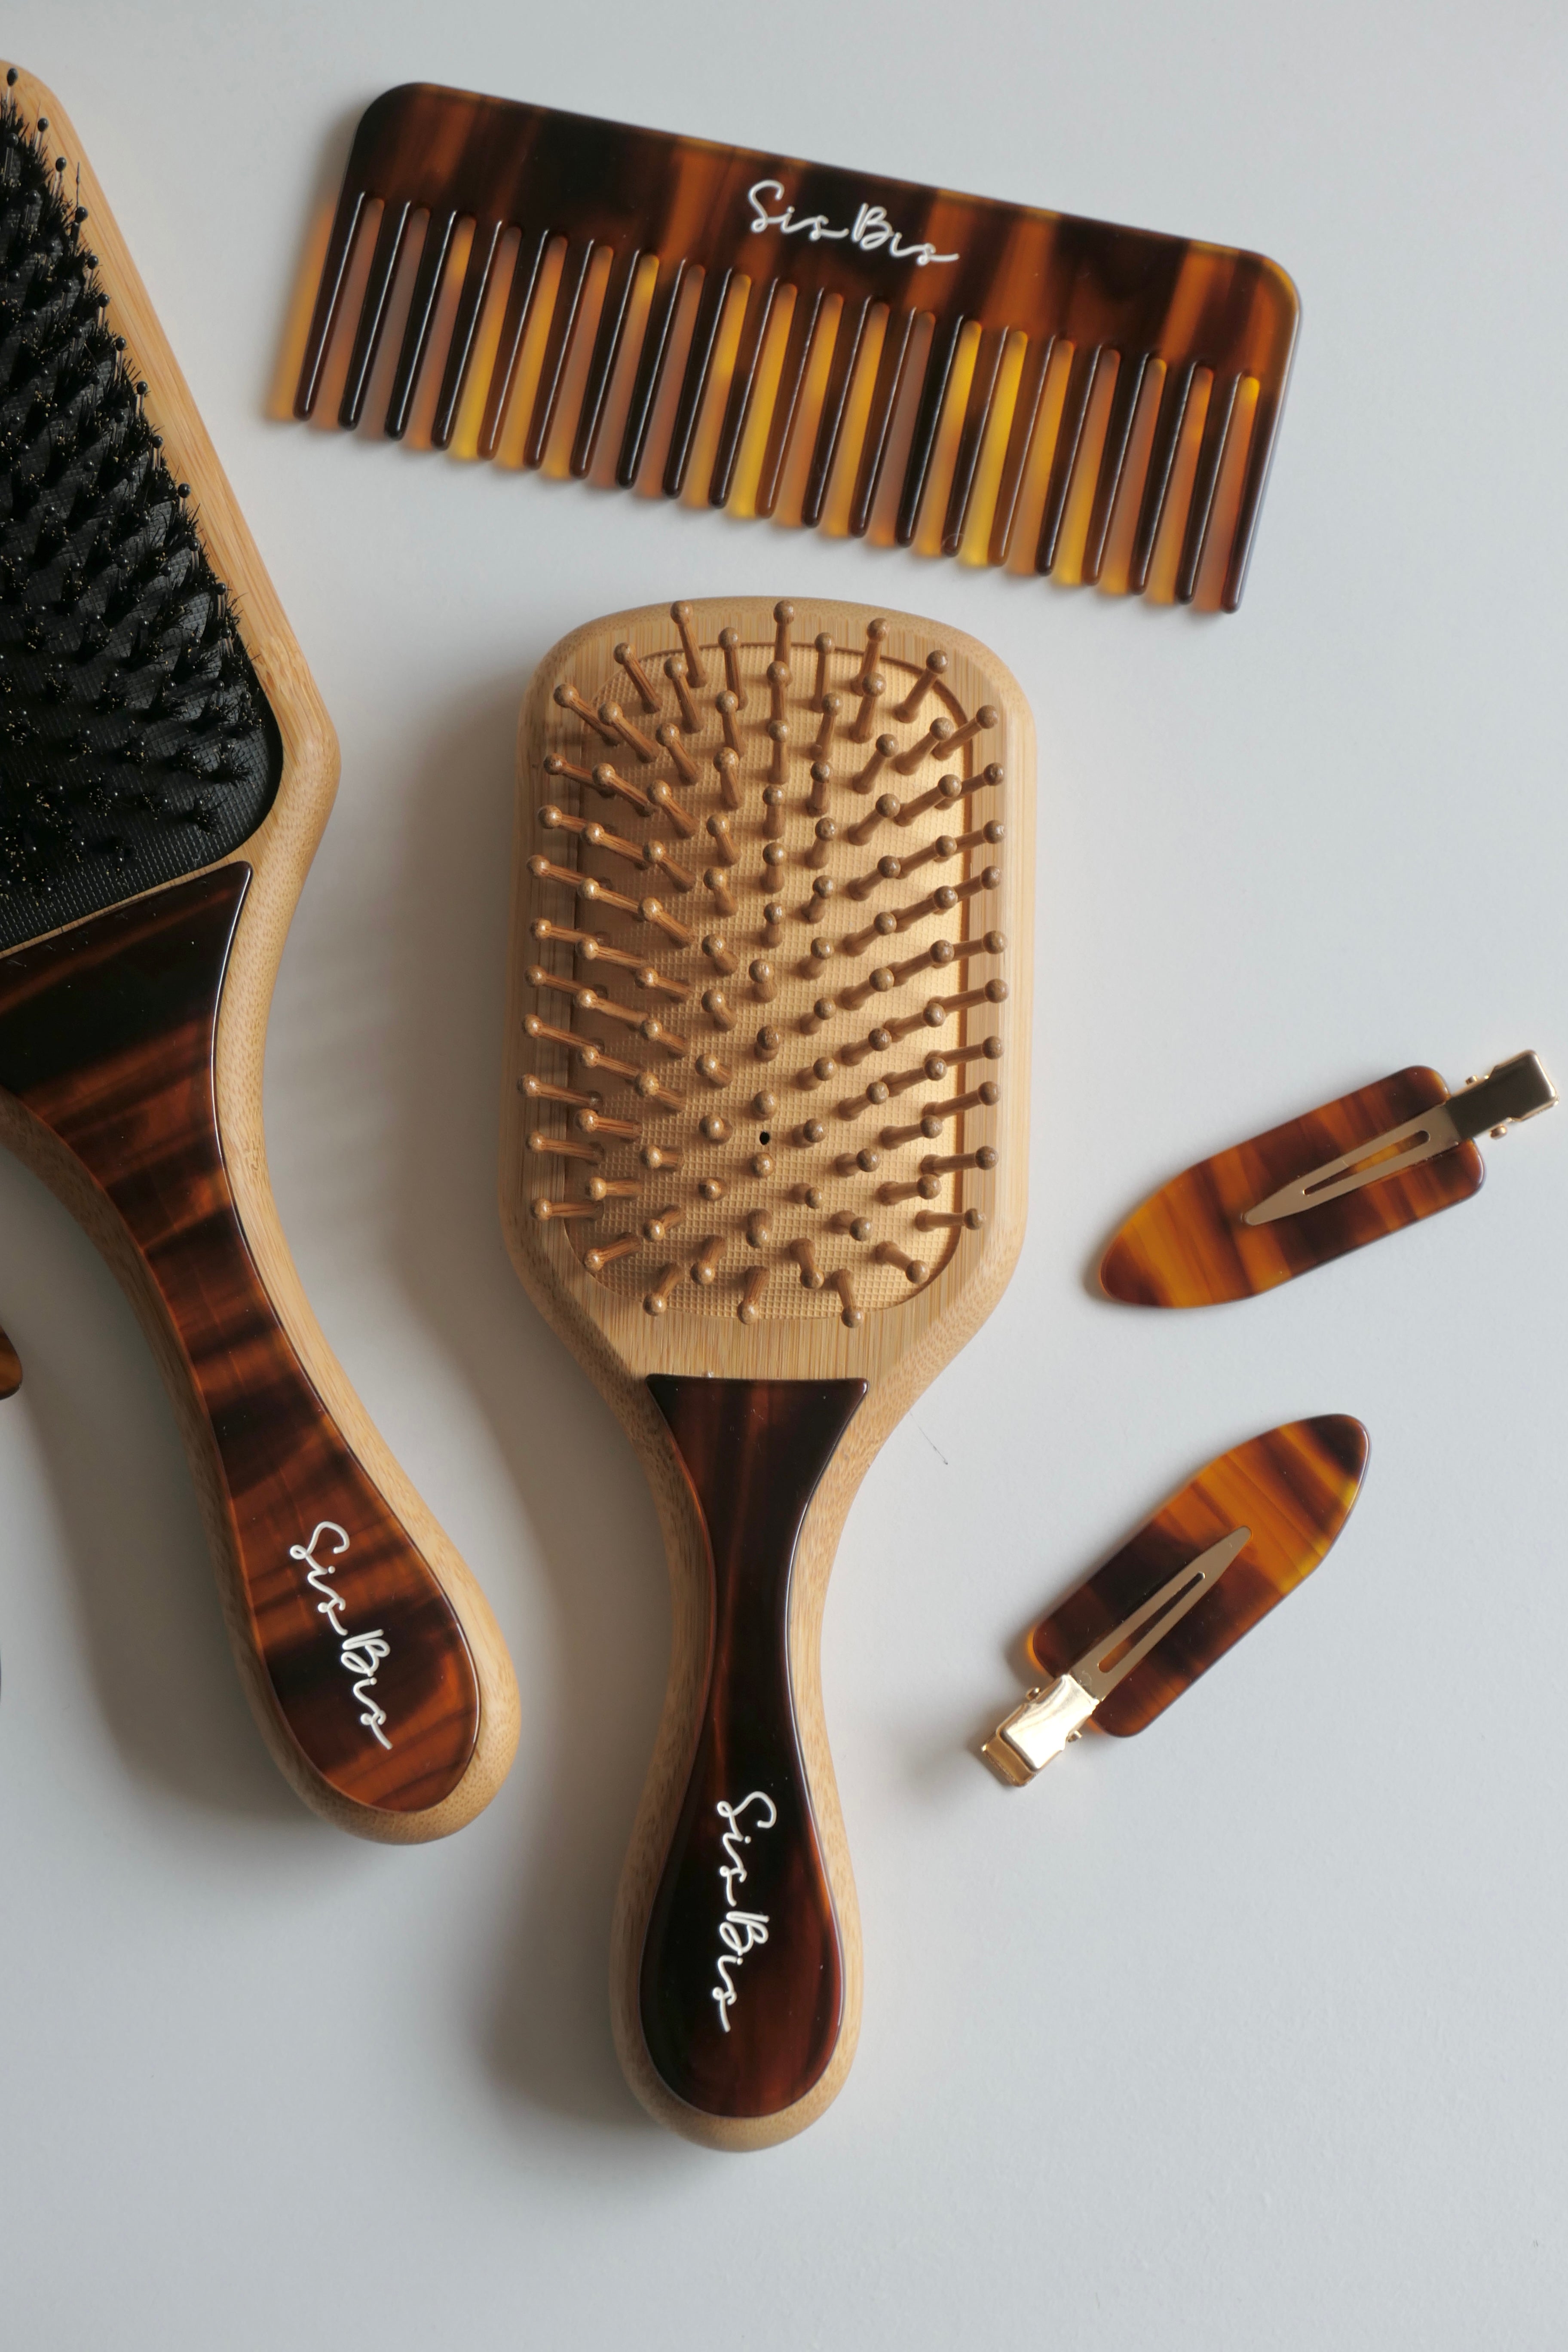 Go-to Brush - Toffee